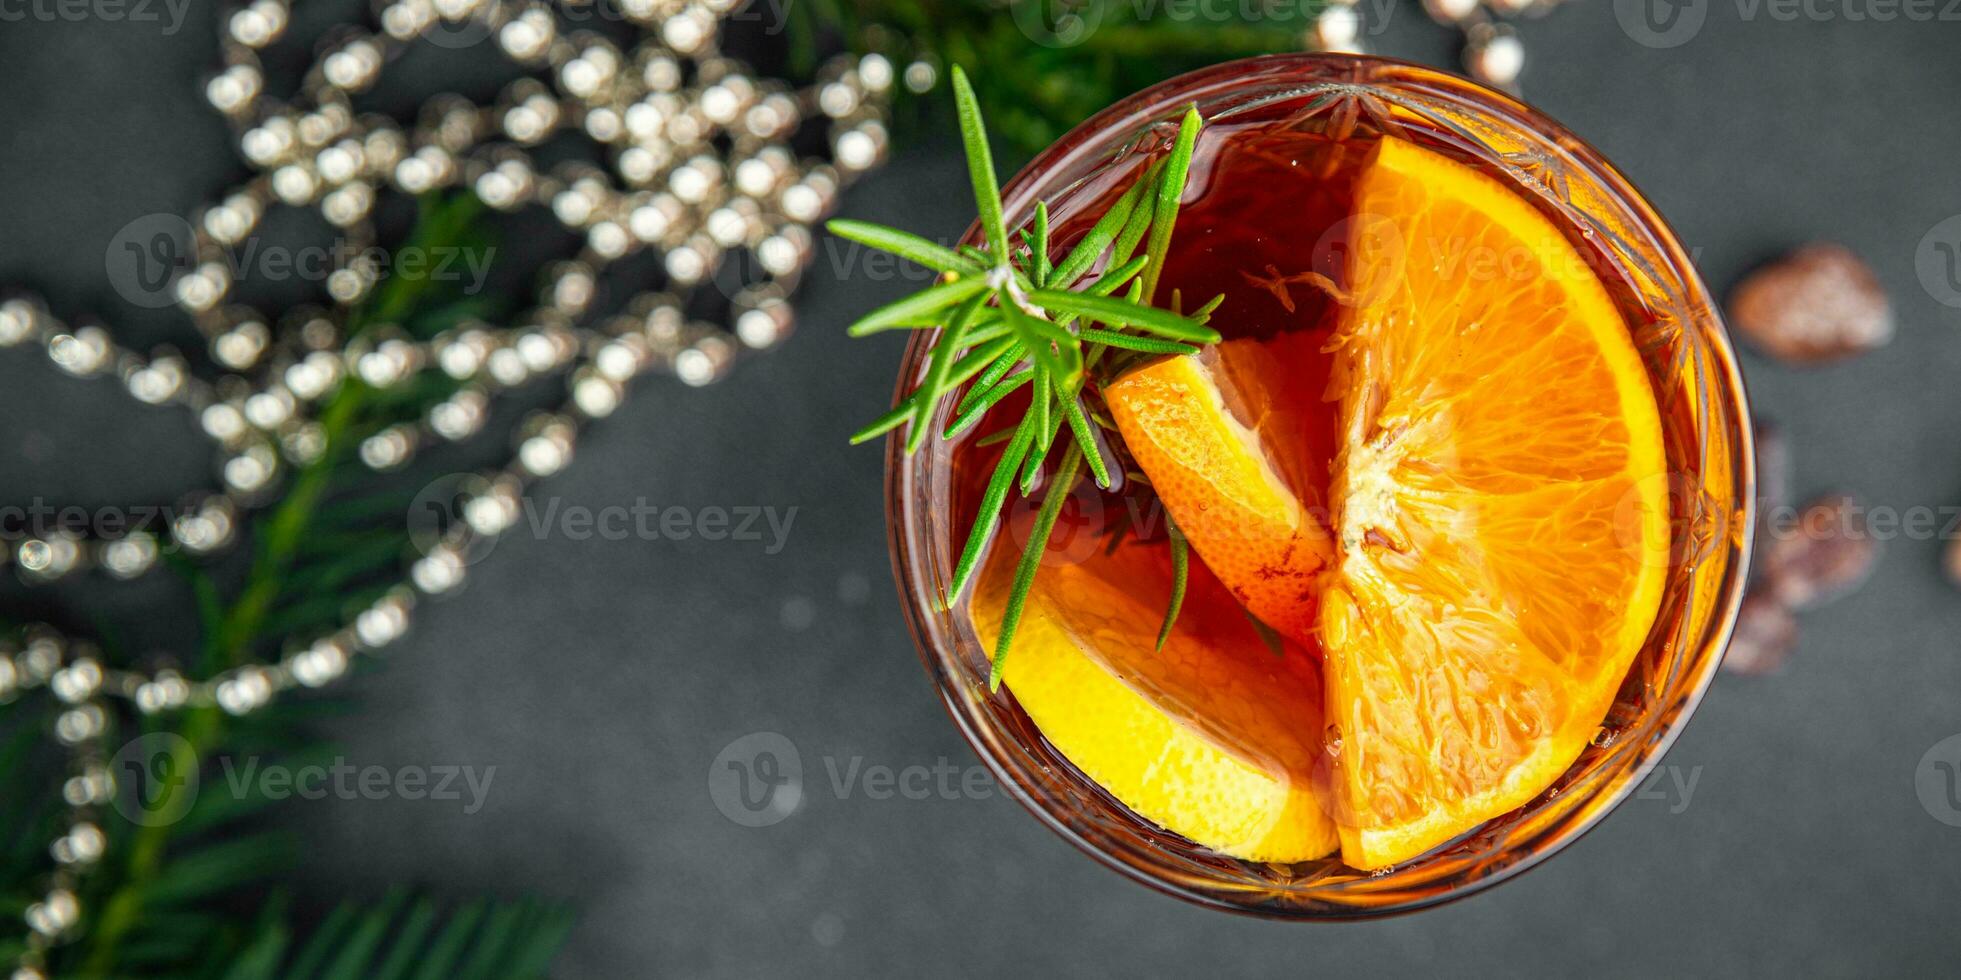 christmas mulled wine cocktail citrus and rosemary traditional drink new year holiday appetizer meal food snack on the table photo